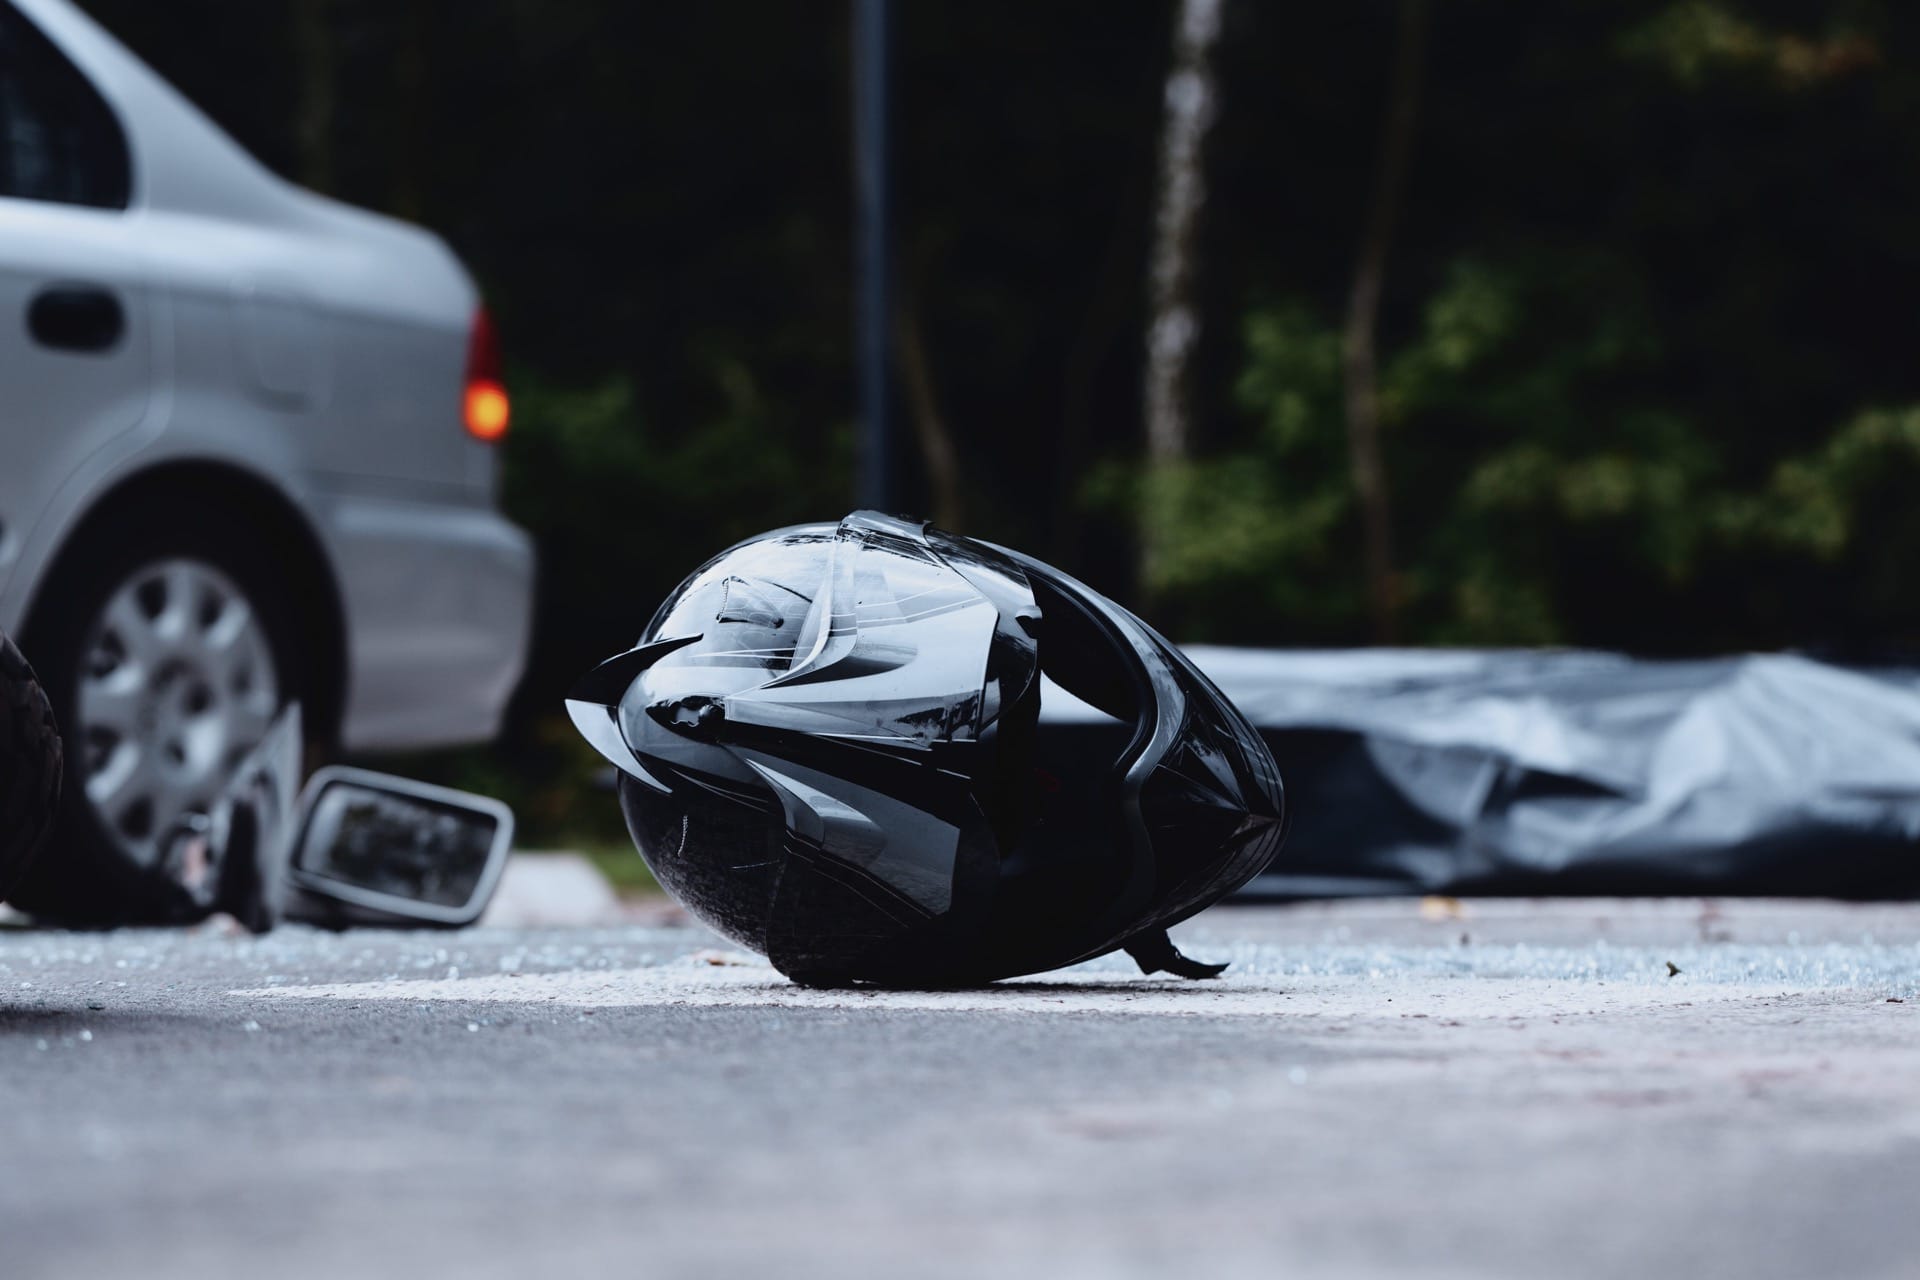 A view of a motorcycle helmet on the road